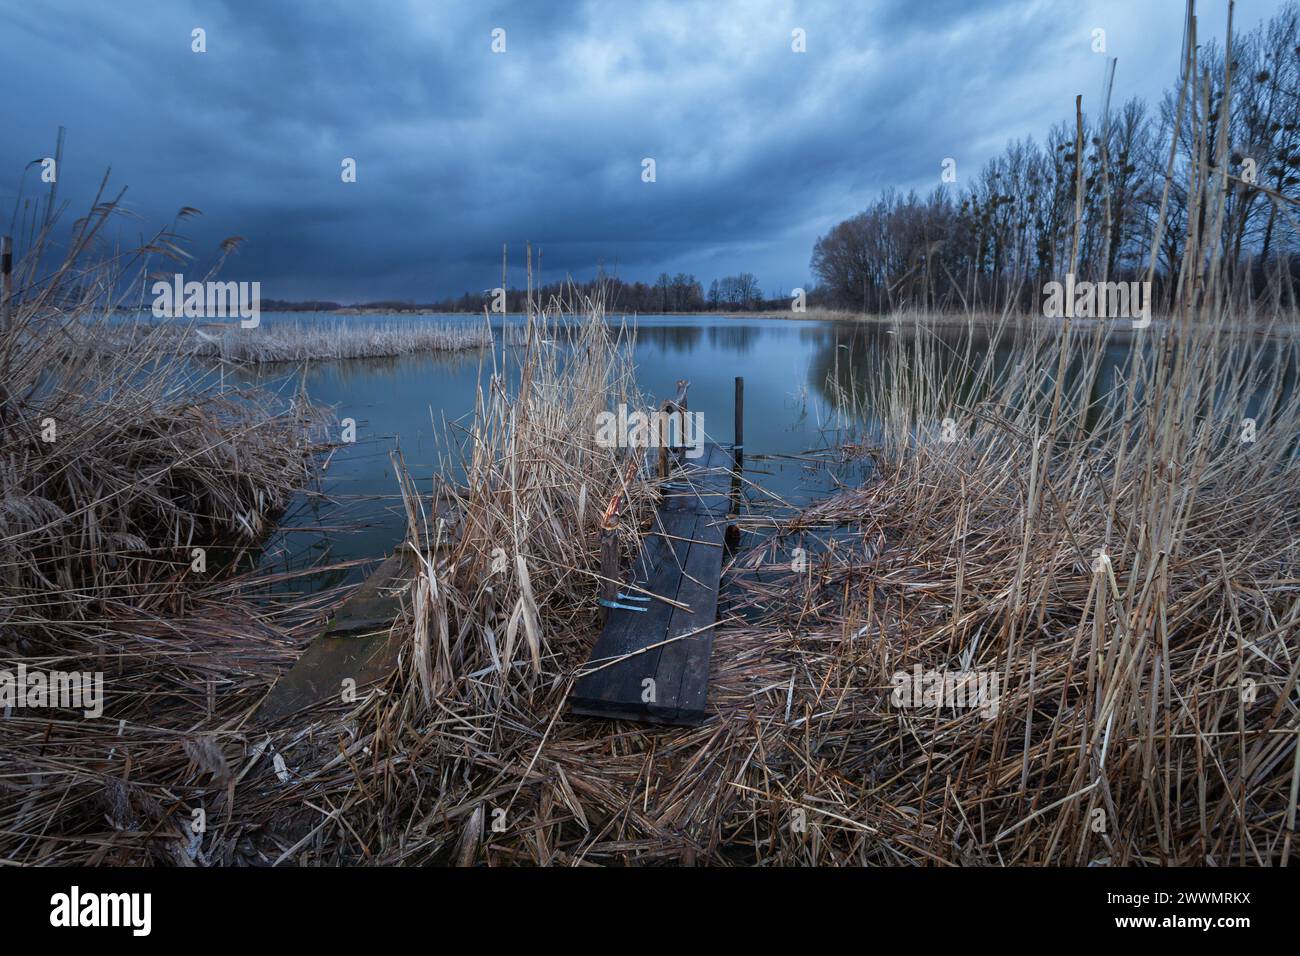 A pier in the reeds and a dark cloudy sky over the lake Stock Photo